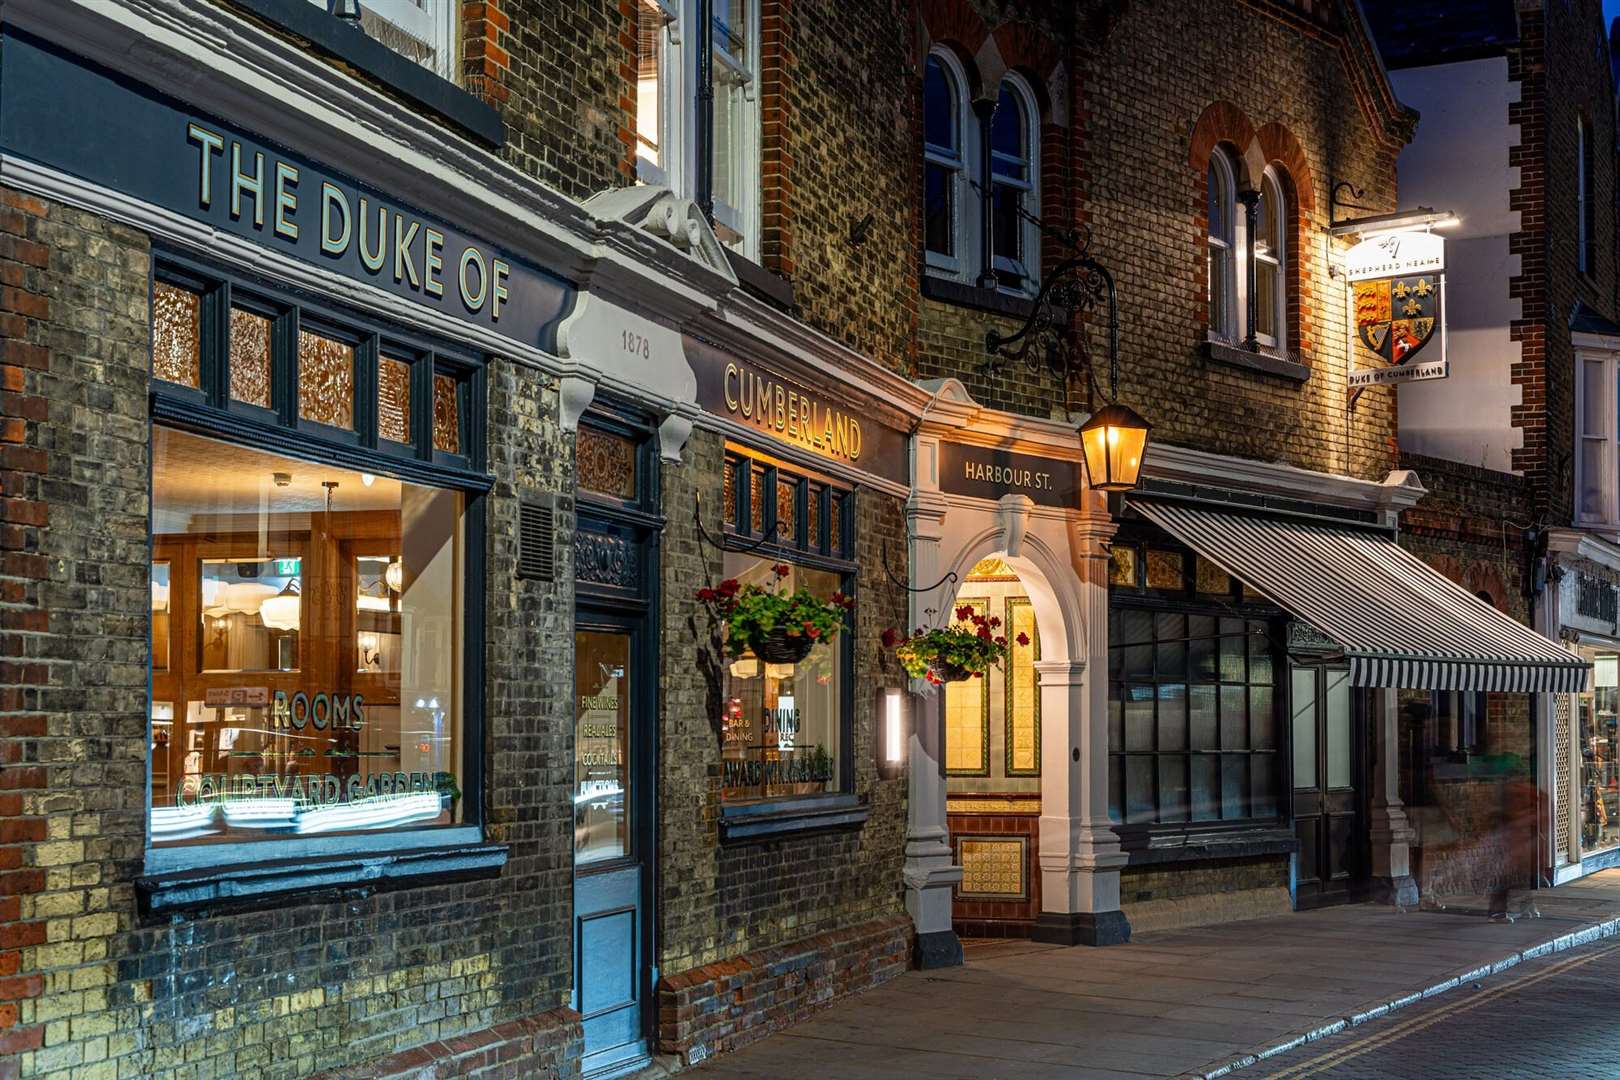 The Duke of Cumberland in Whitstable. Picture: Shepherd Neame